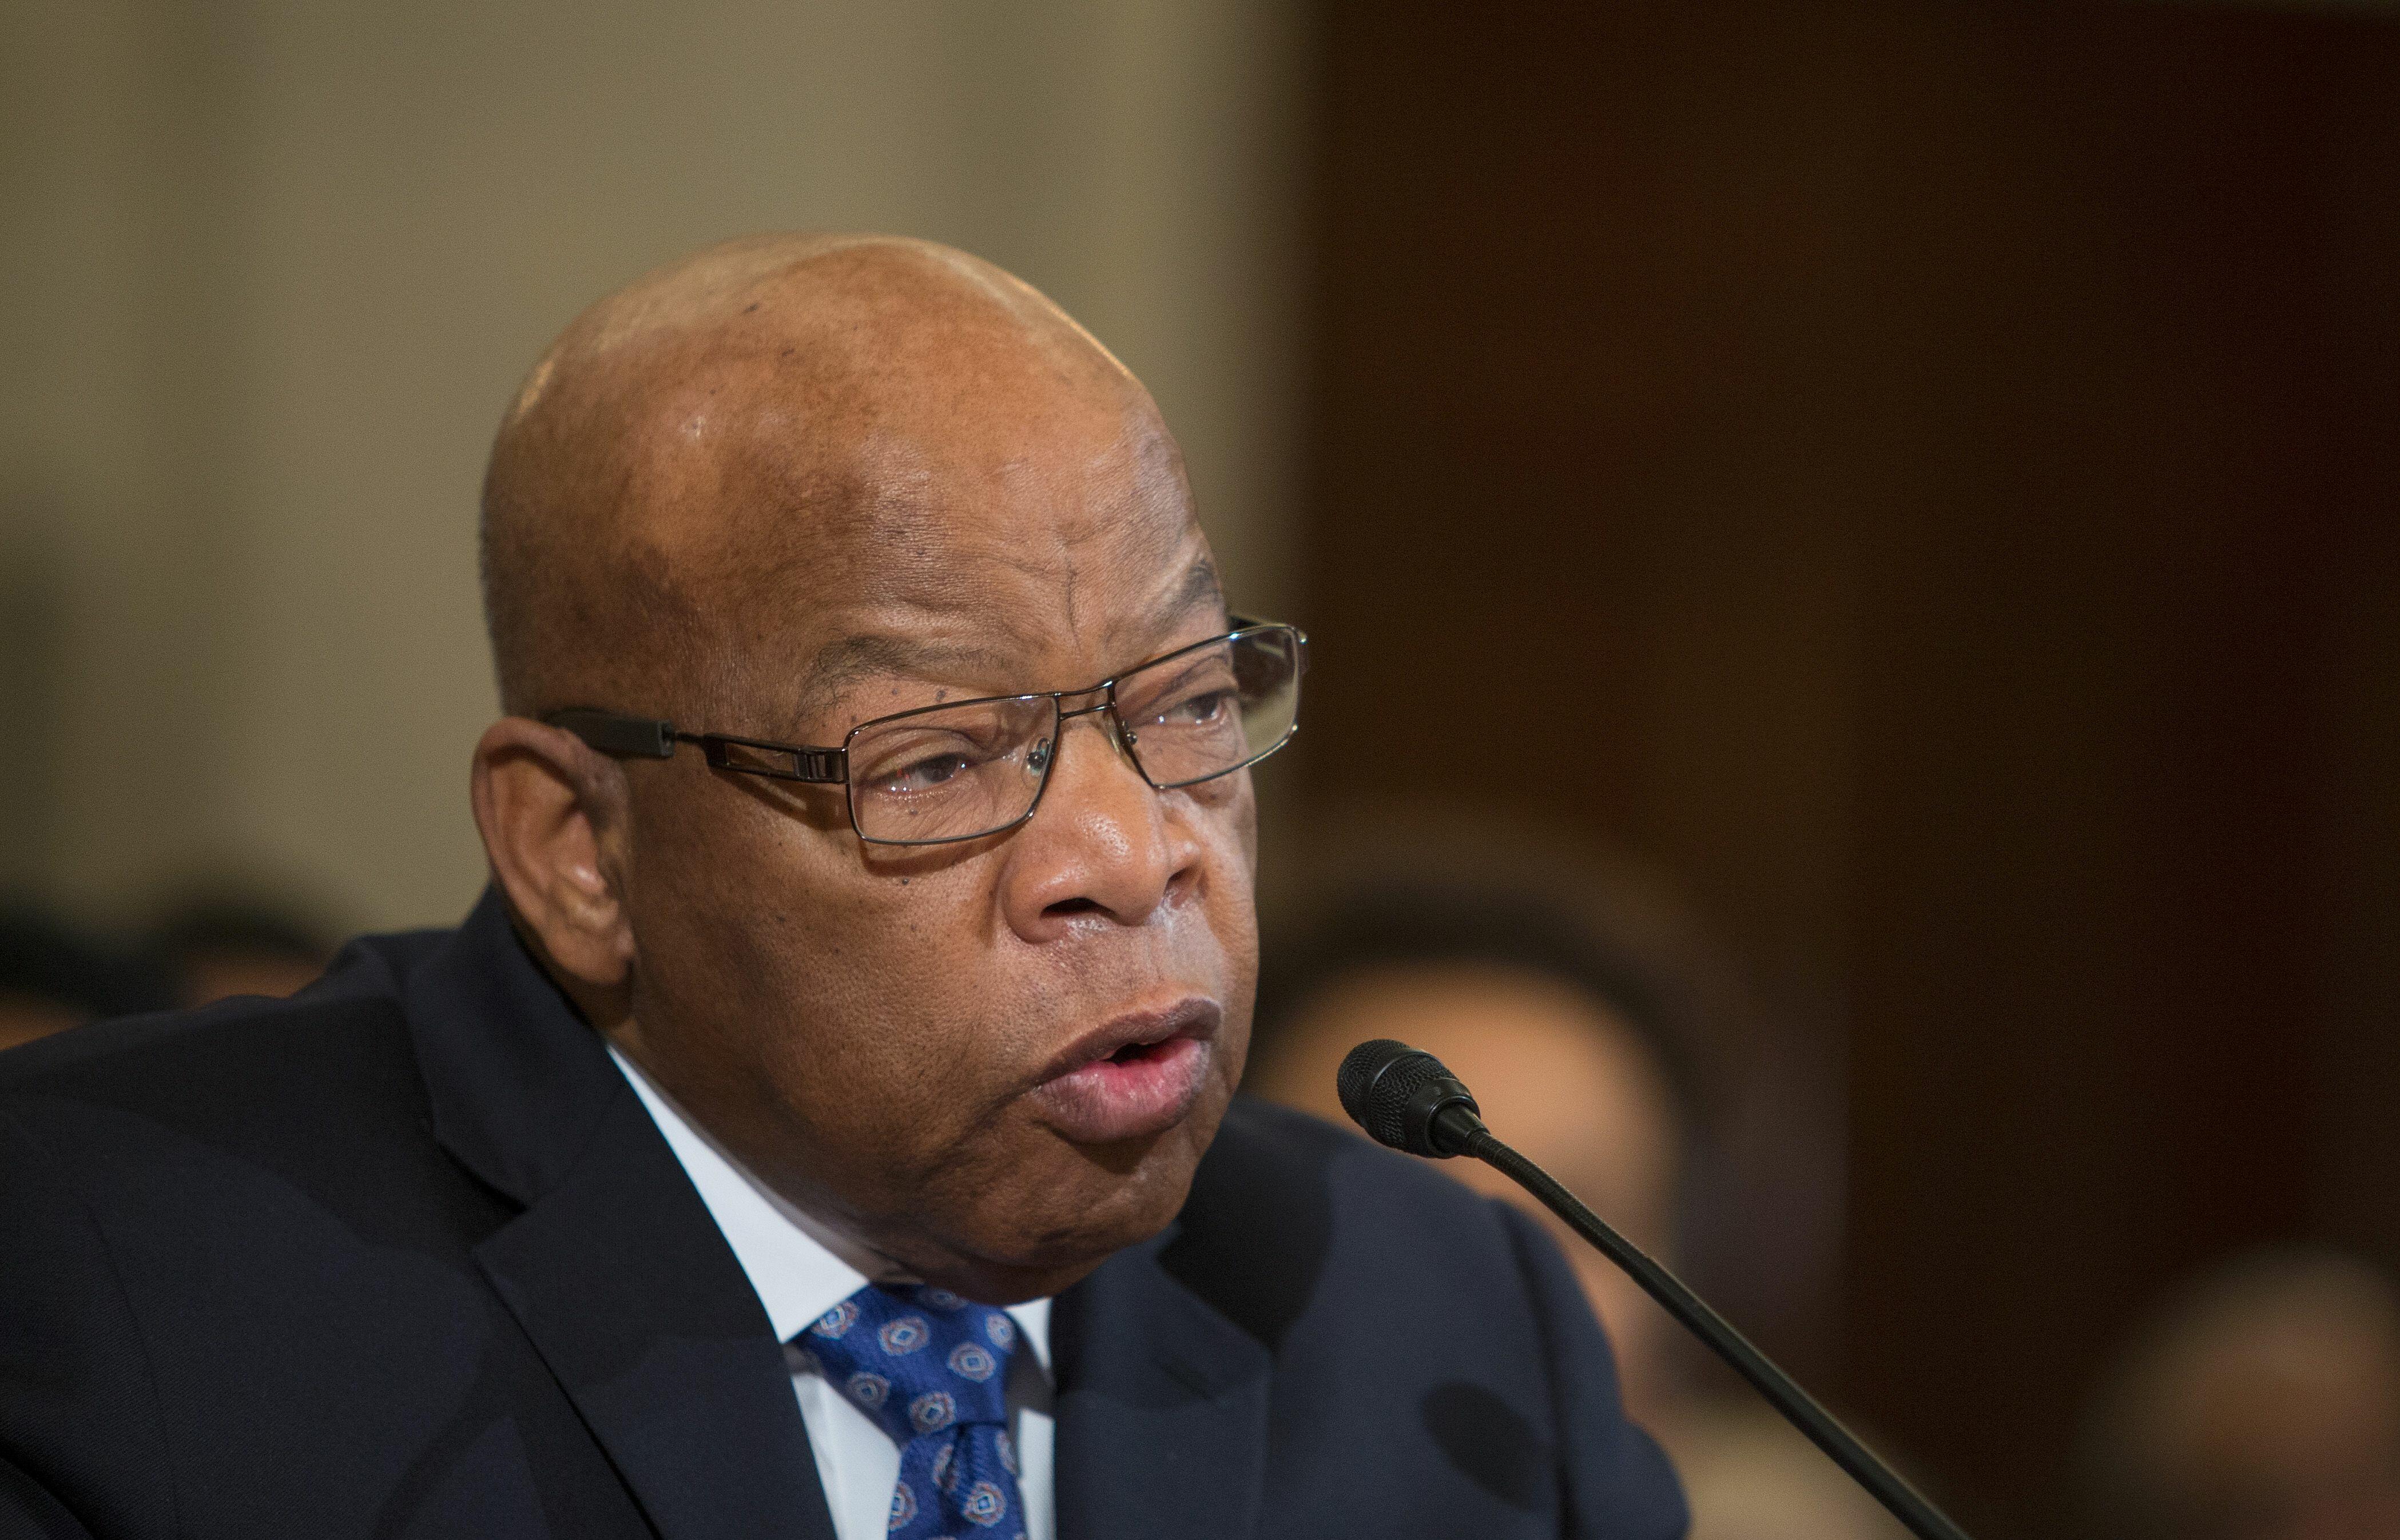 Rep. John Lewis (D-GA) asks questions during the Senate Judiciary Committee hearings on nomination of Senator Jeff Sessions (R-AL) for attorney general on Capitol Hill in Washington, DC on January 11, 2017.  / AFP / Tasos Katopodis        (Photo credit sh